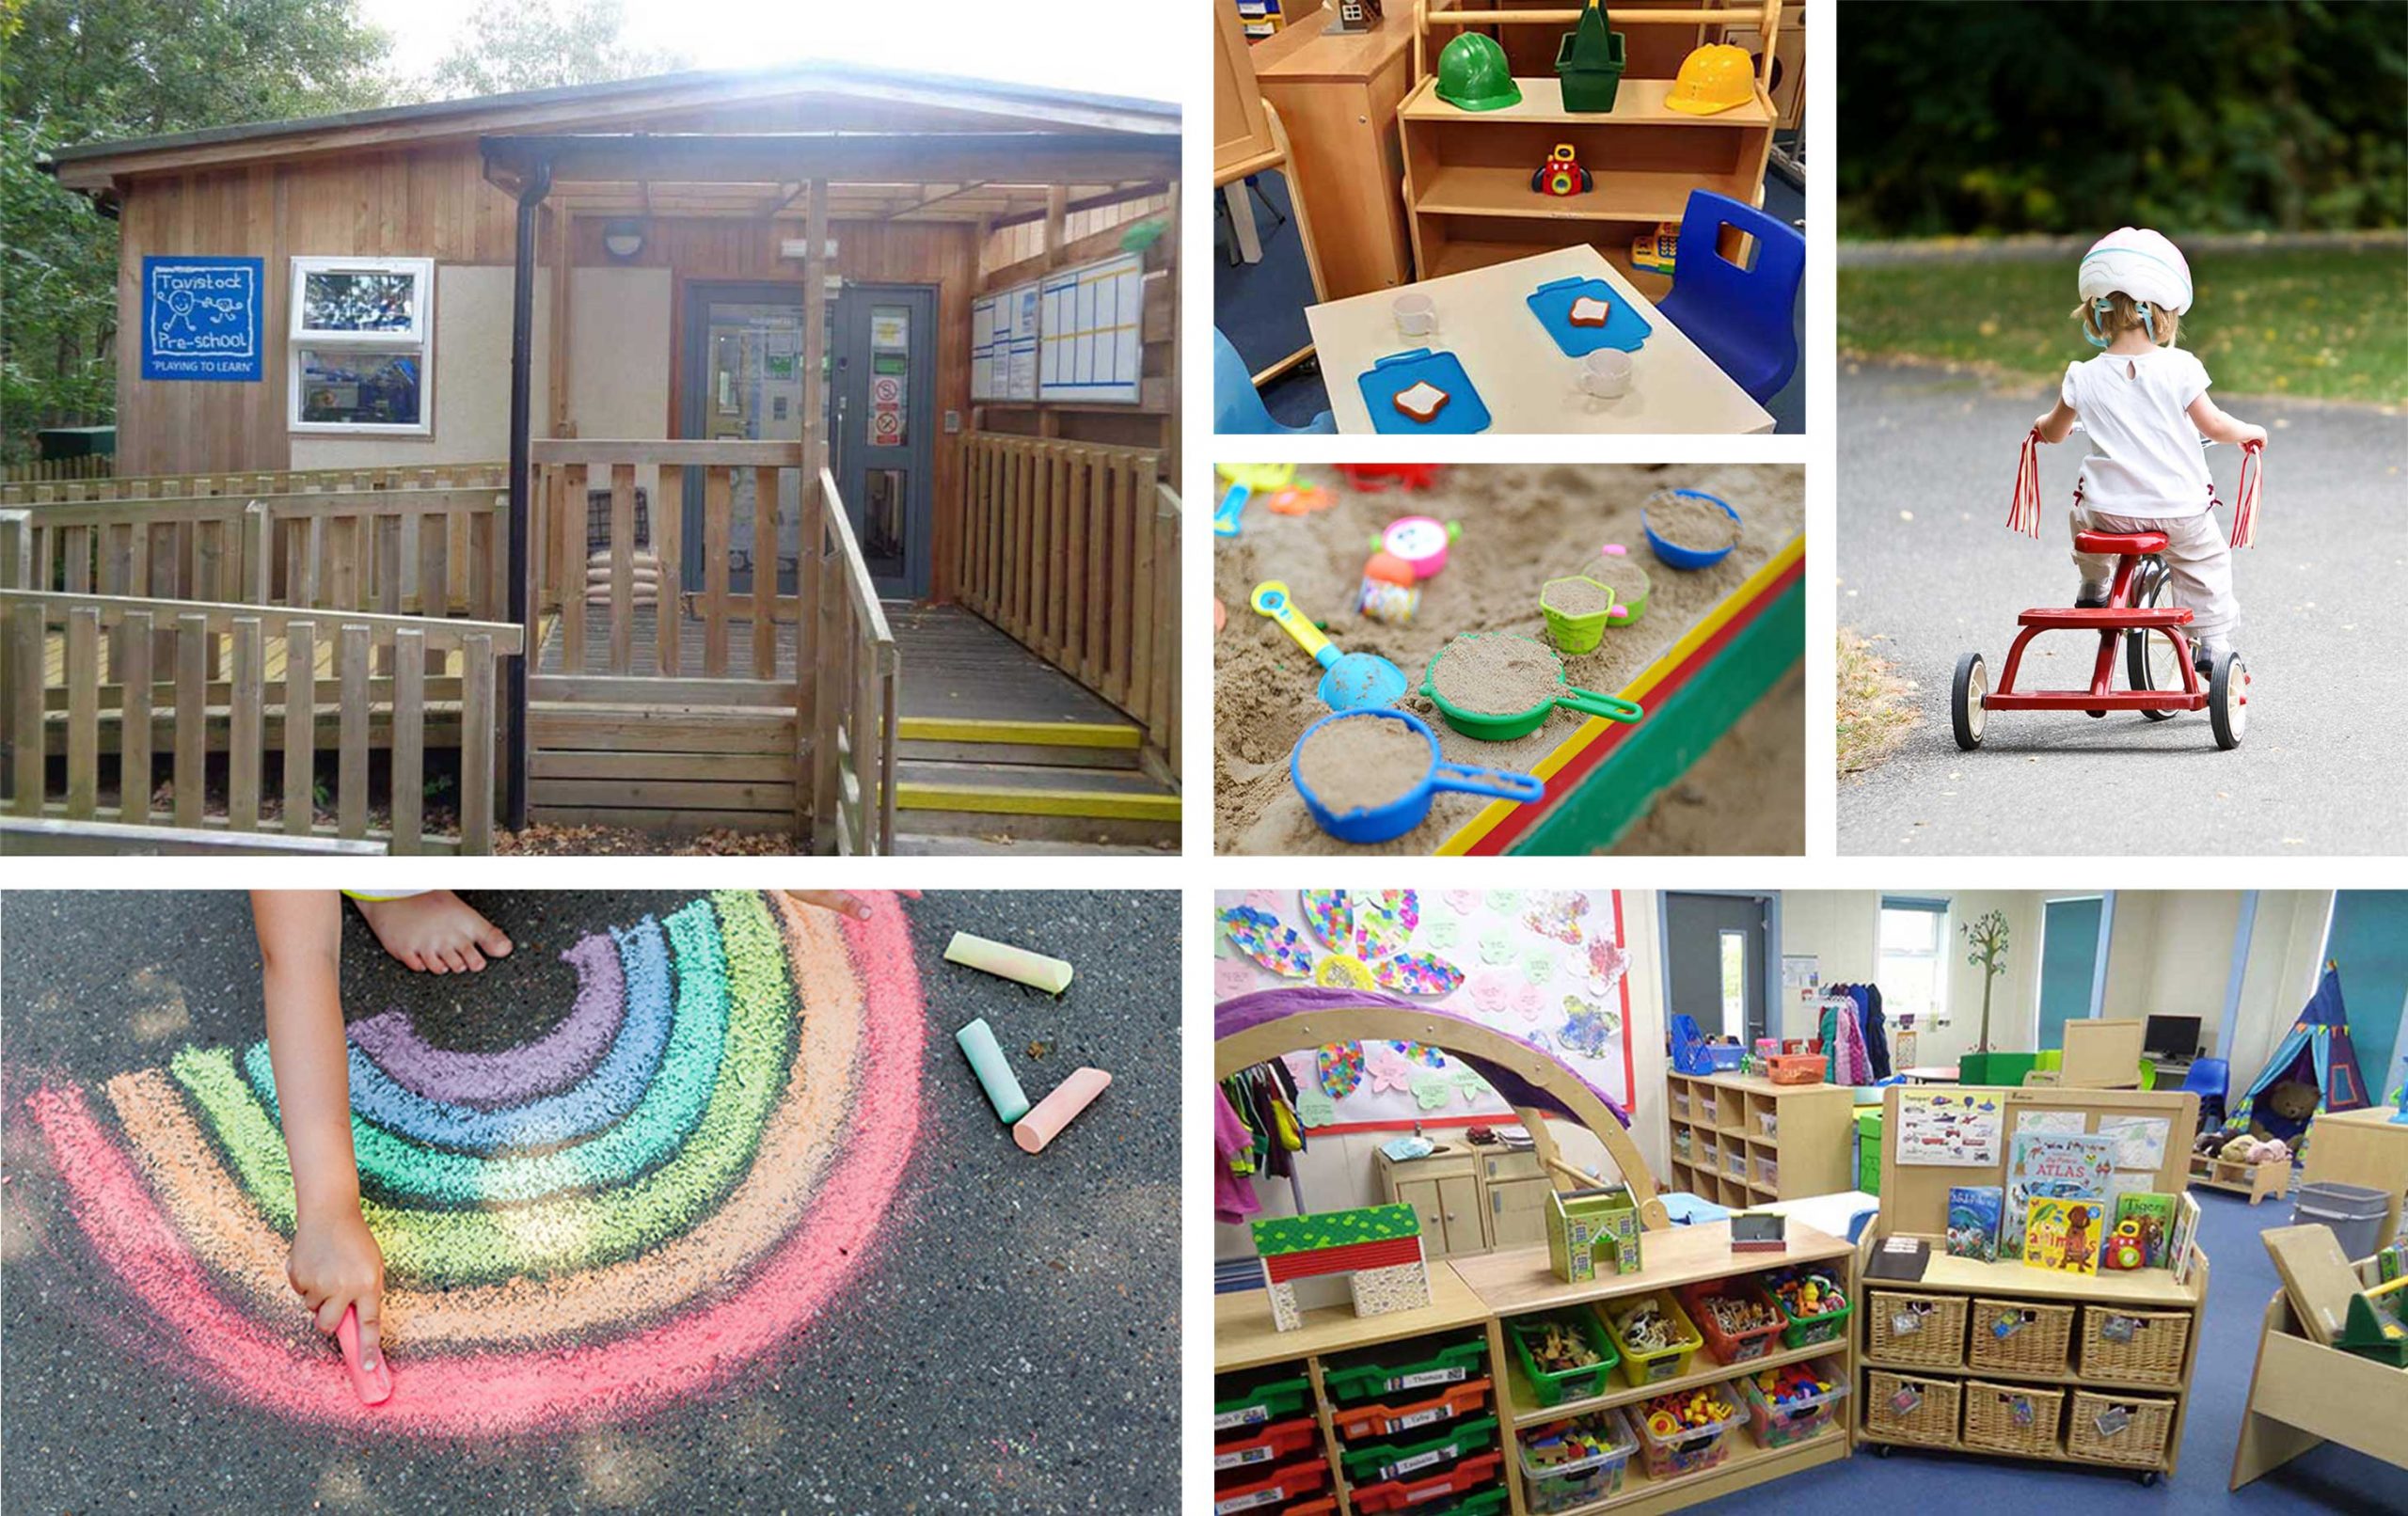 Gallery Images of Pre-School and images representing play